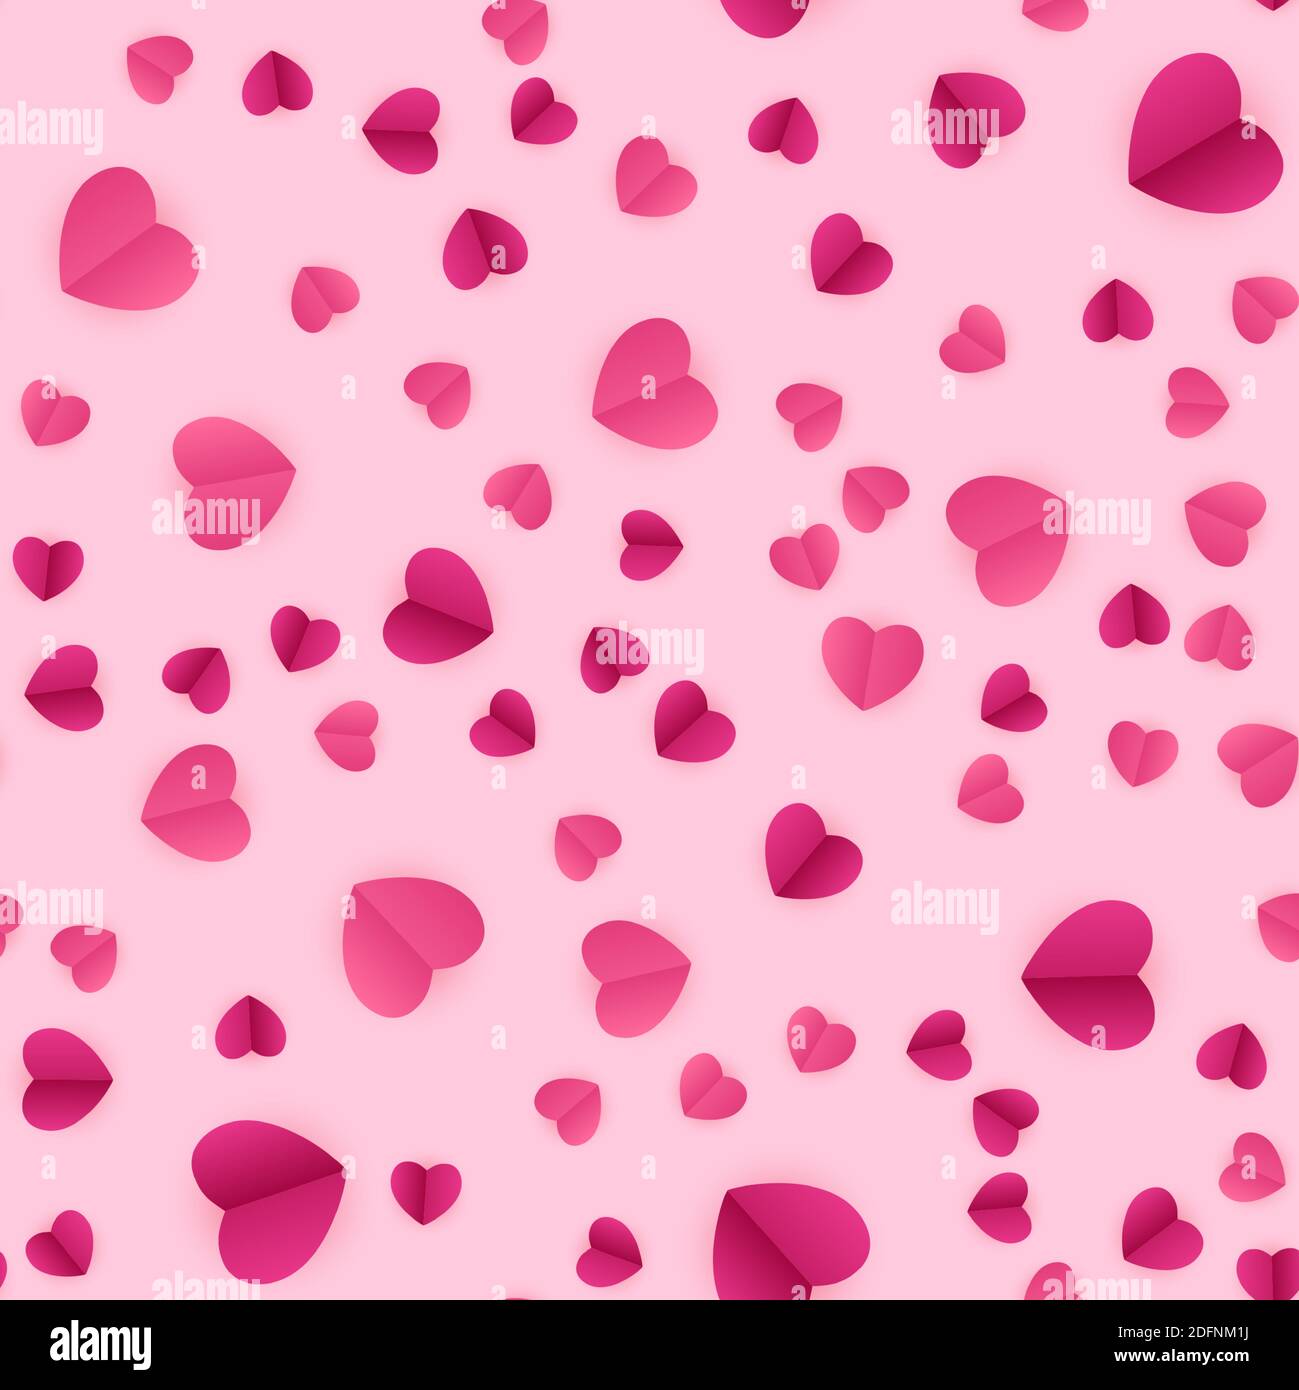 Abstract Heart Seamless Pattern Background. Vector Illustration Stock Vector